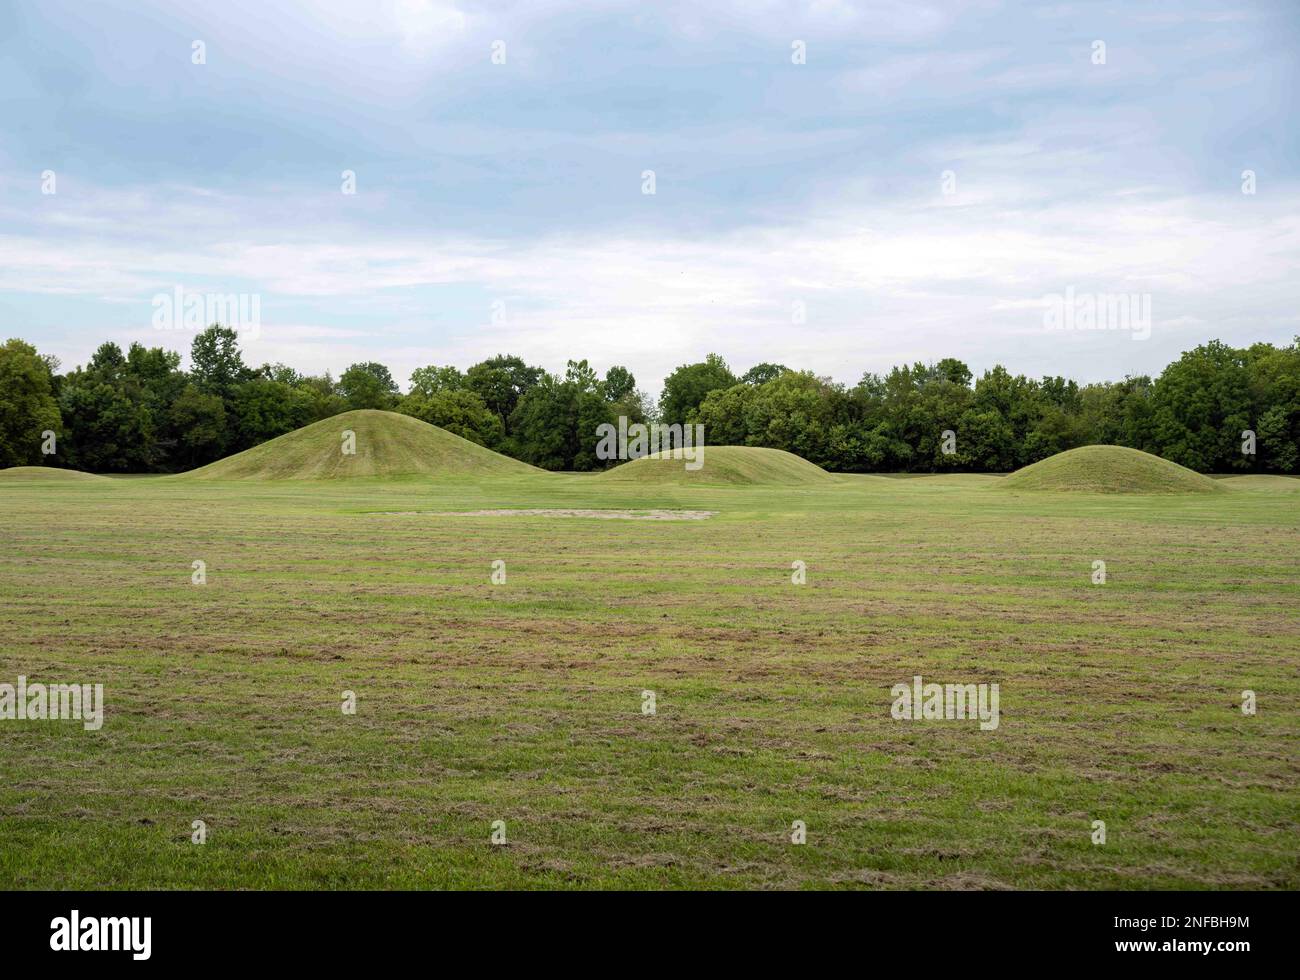 Native American Hopewell Culture prehistoric Earthworks burial mounds in Mound City Park Ohio. Ancient circular mounds and long mounds in a row. Stock Photo